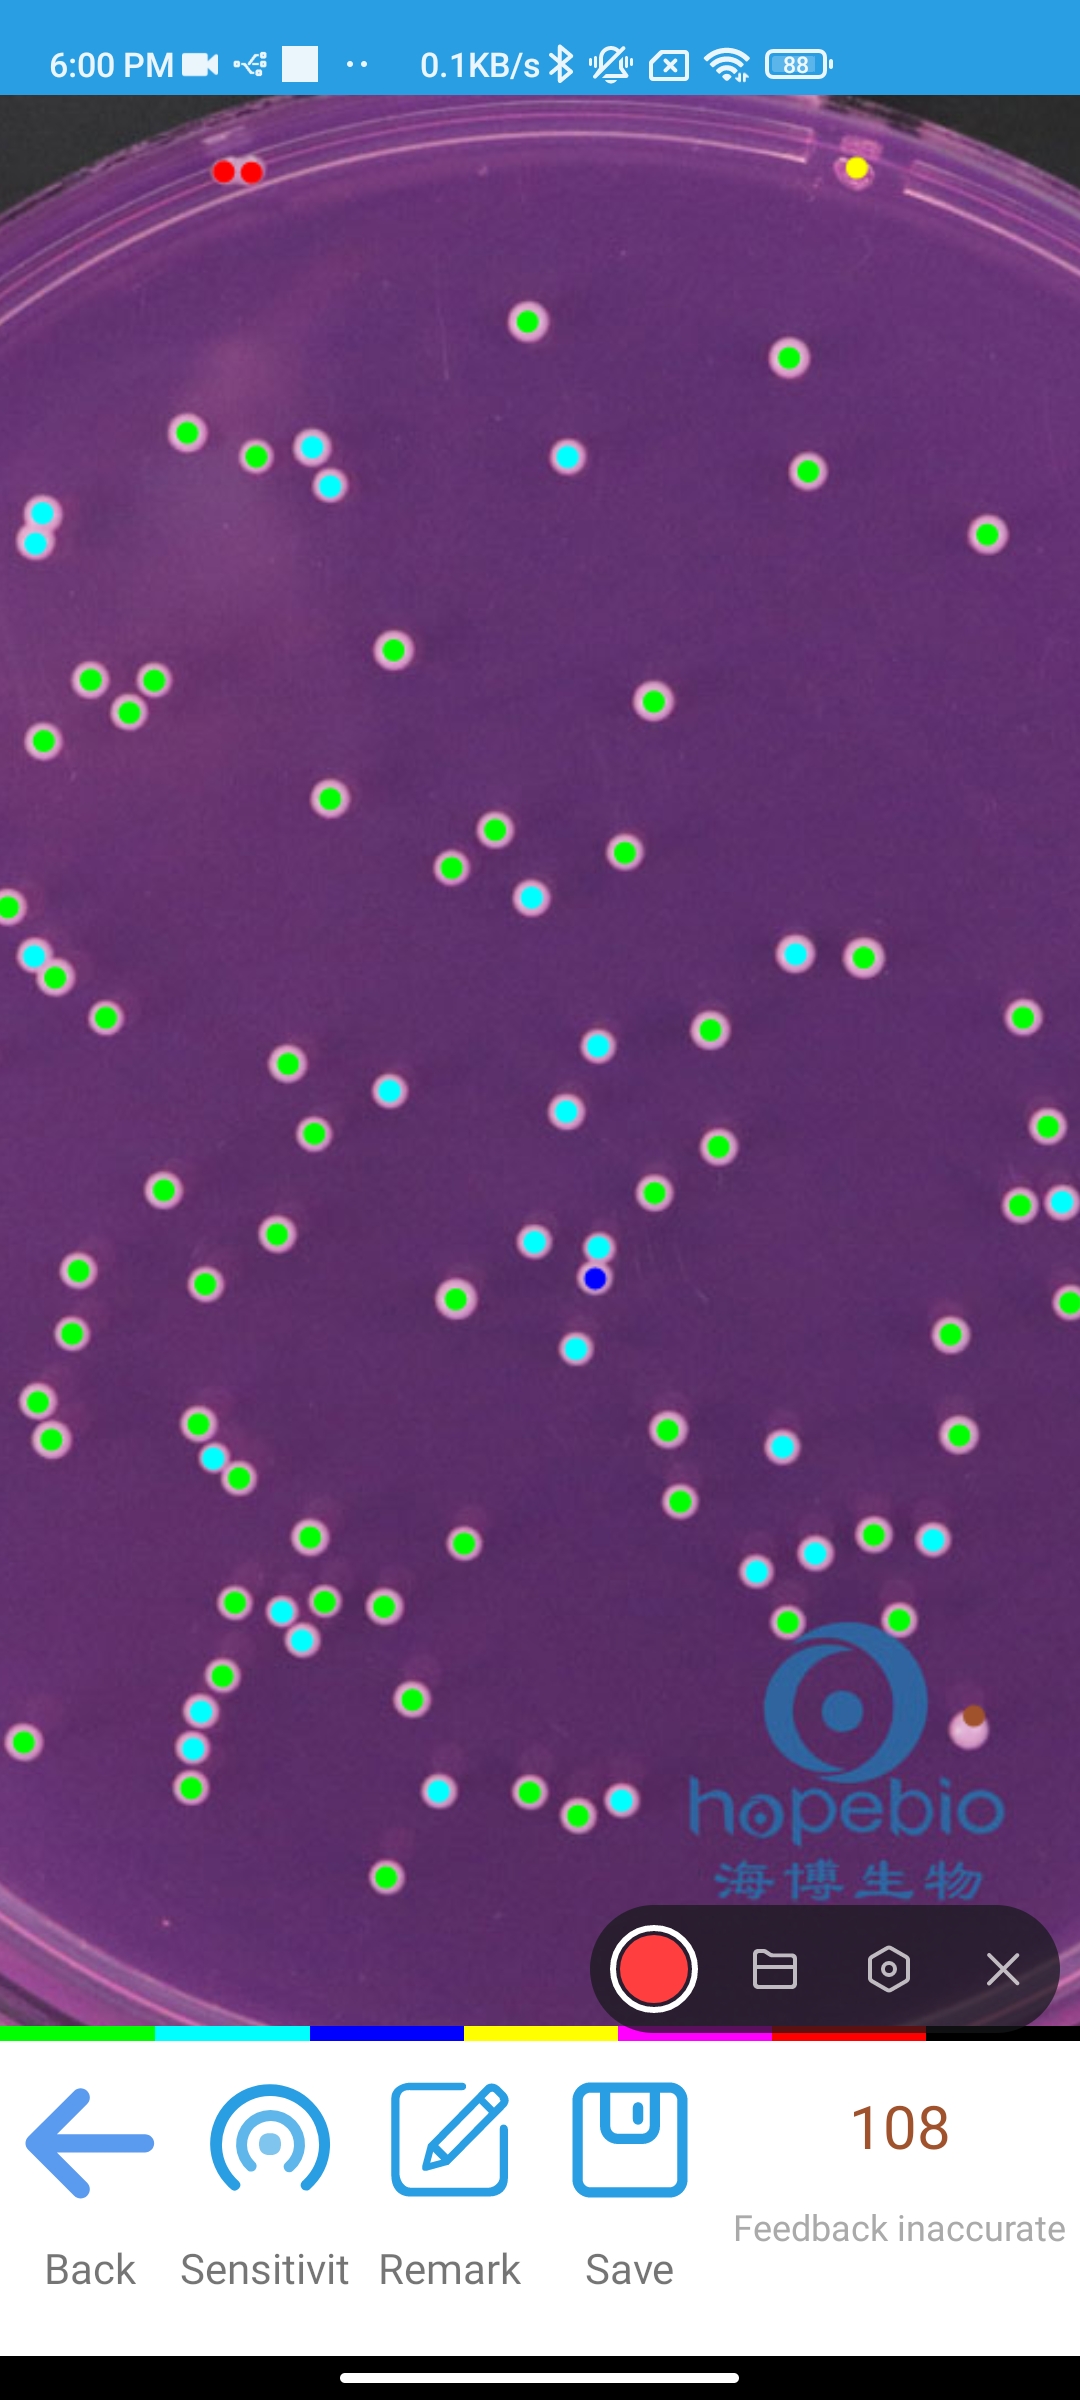 How do you Automated  identify bacterial colonies in a Petri dish?